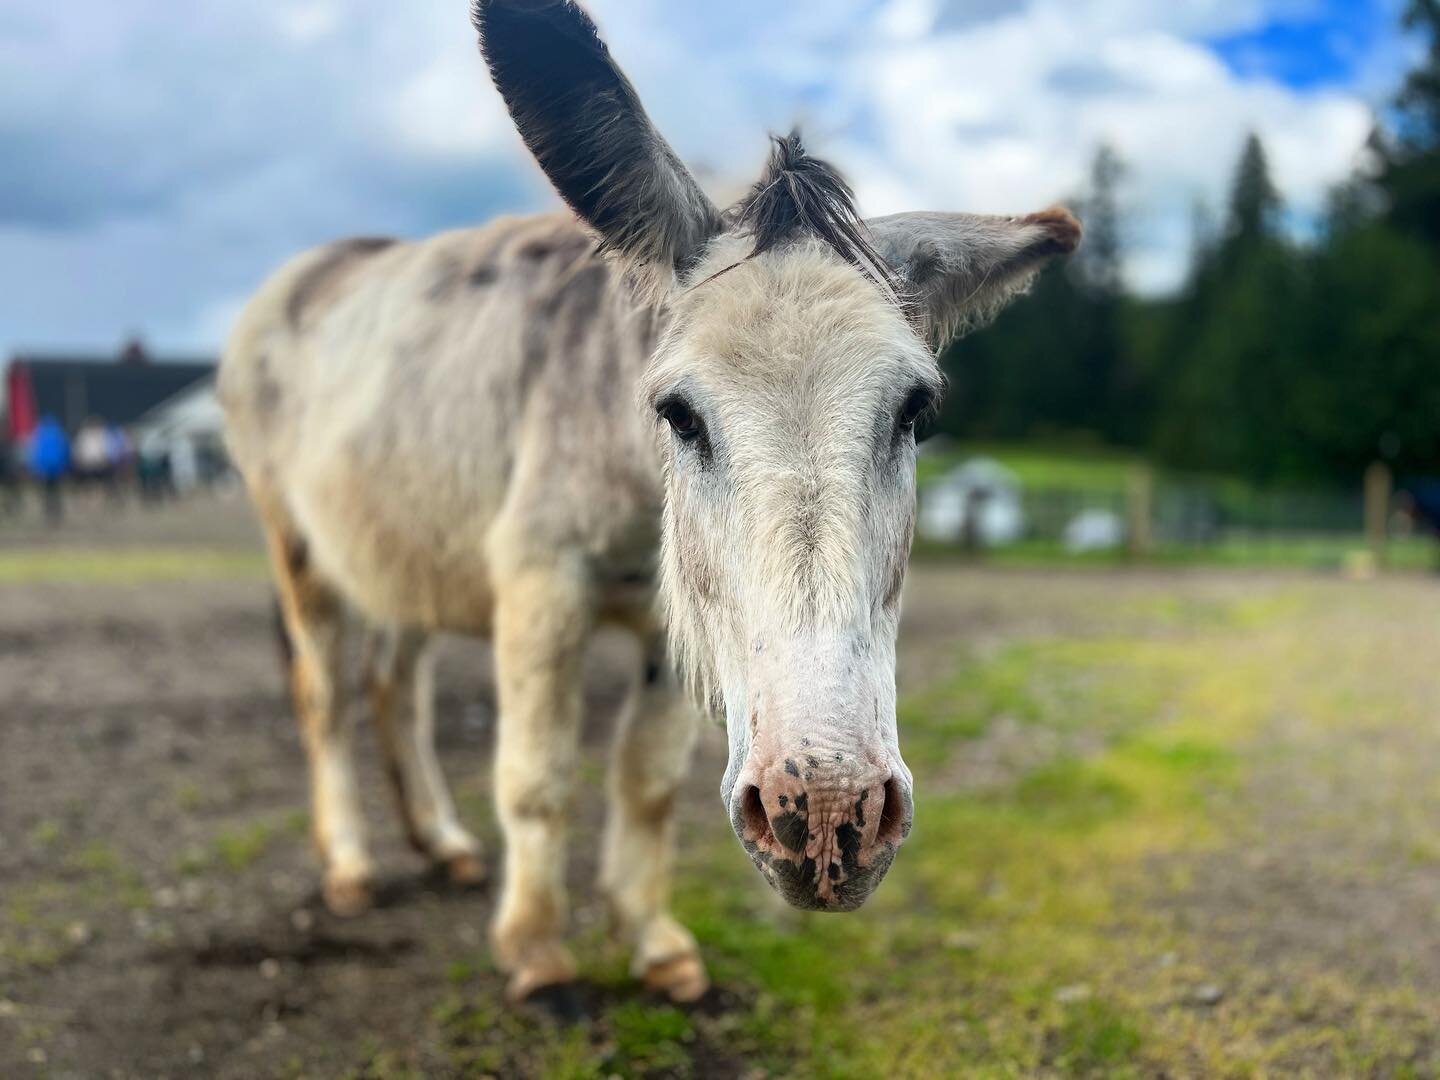 What an incredible opportunity to practice Tei-Shin with Dr. Quinn at the @oregon_donkey_sanctuary_nw 💫

It felt so good to develop connections with these sweet majestic beasts that are so misunderstood. Fun fact, they are more related to zebras tha